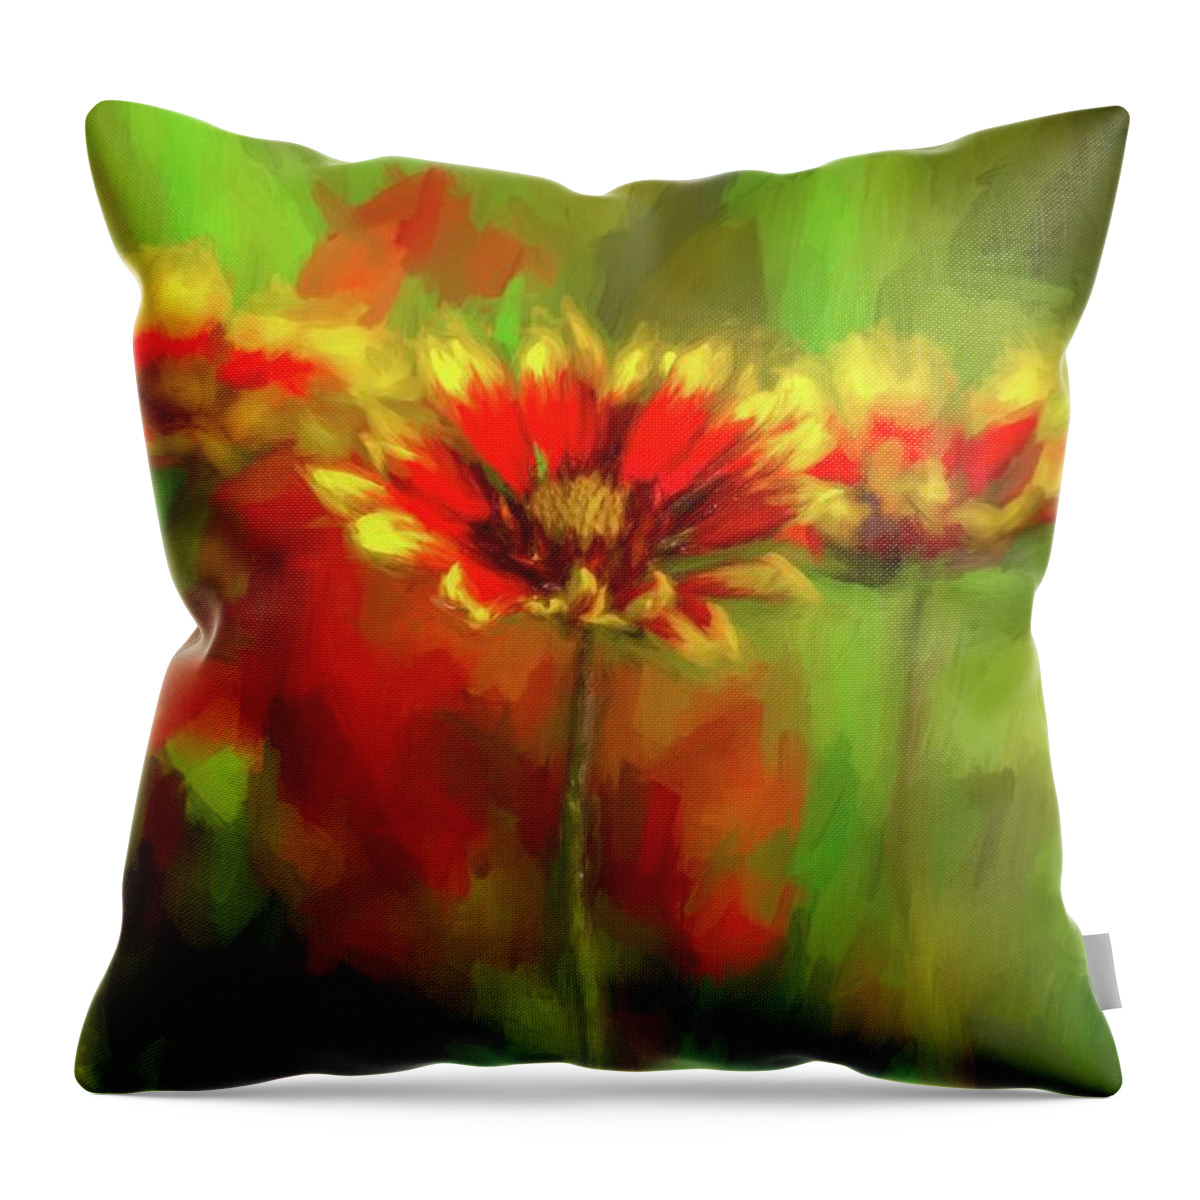 Nature Throw Pillow featuring the photograph Abstract Wildflowers by Linda Shannon Morgan